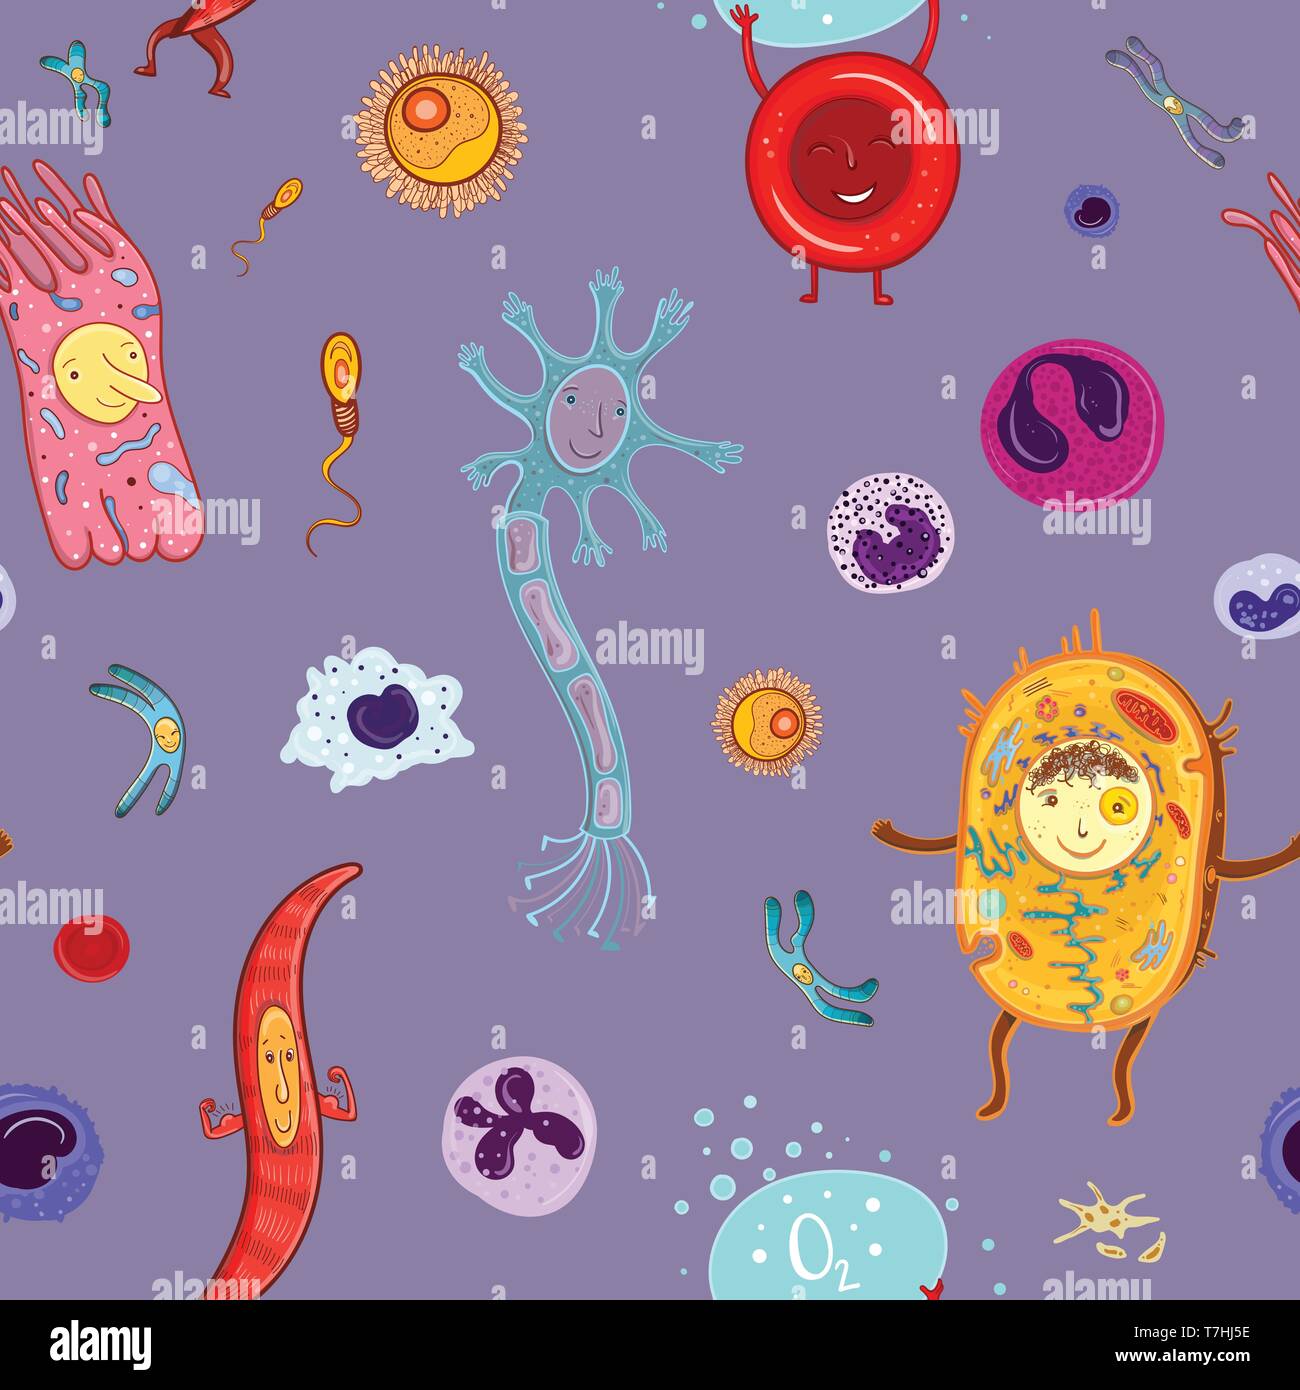 Vector biological seamless pattern with human cells and chromosomes. Illustration for school and kids. Stock Vector